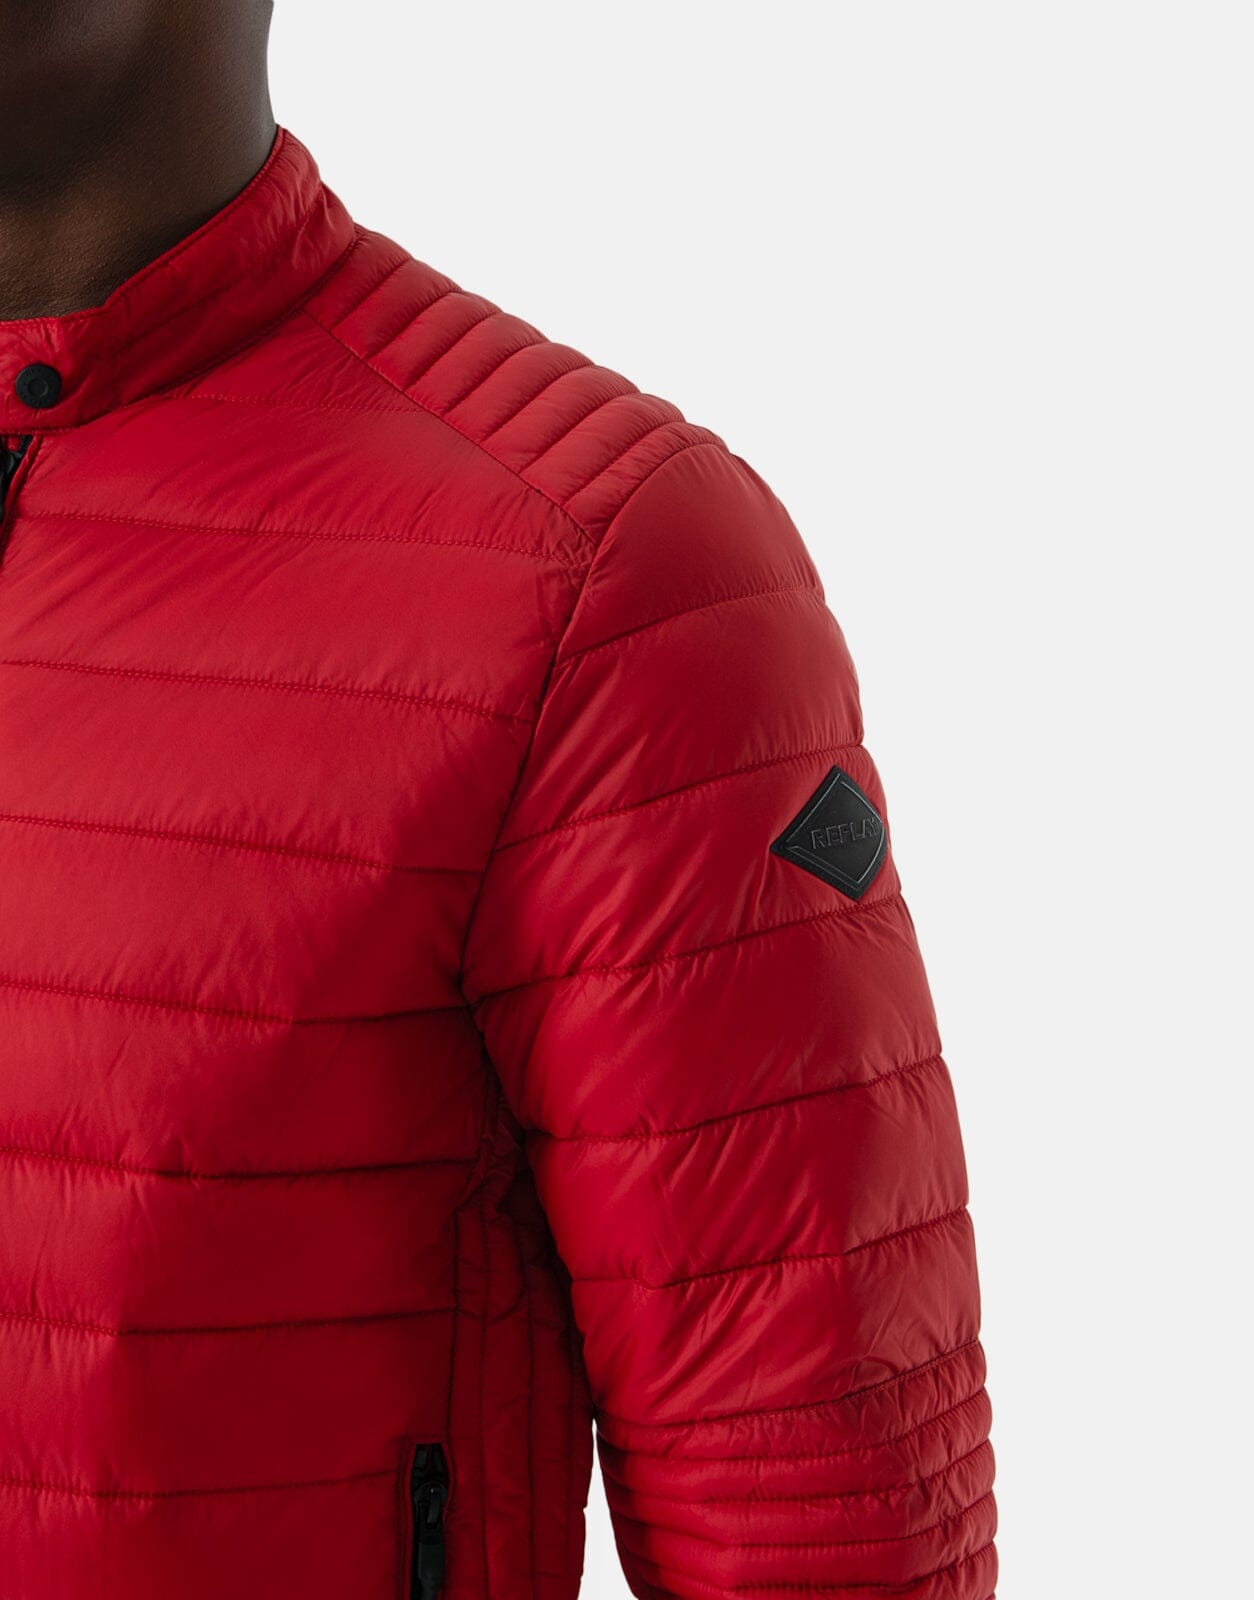 Replay Slim Fit Recycled Nylon Red Jacket - Subwear